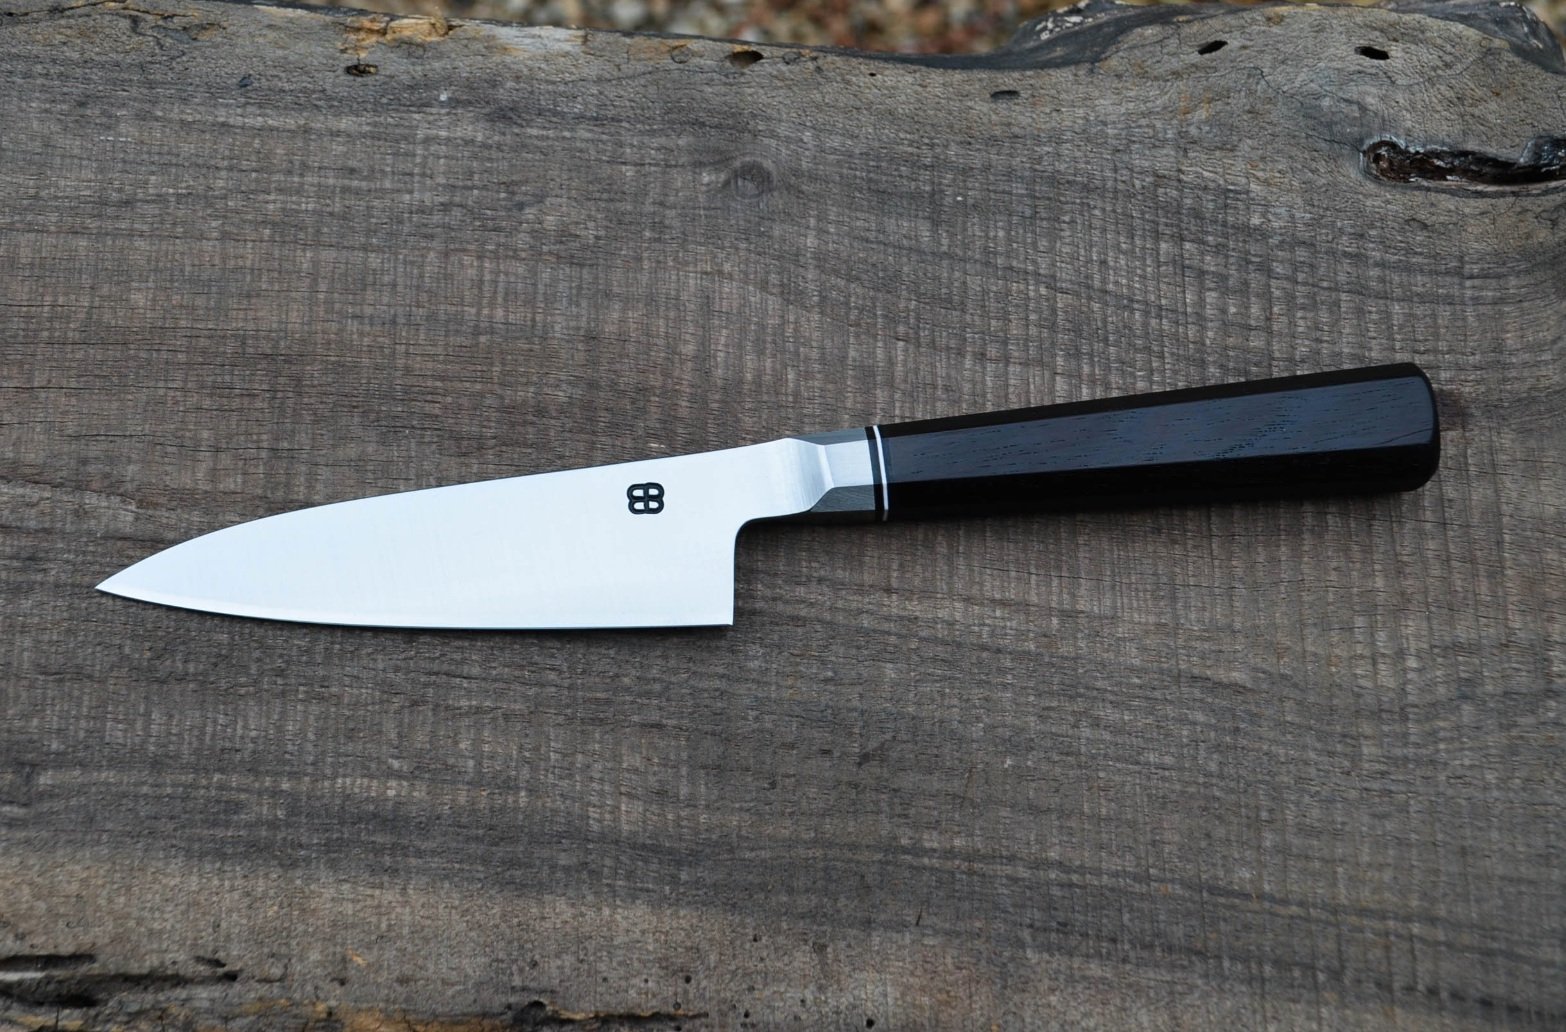  4.75” Integral Petty. Octagonal Blackwood Handle with White Fiber Spacer.  